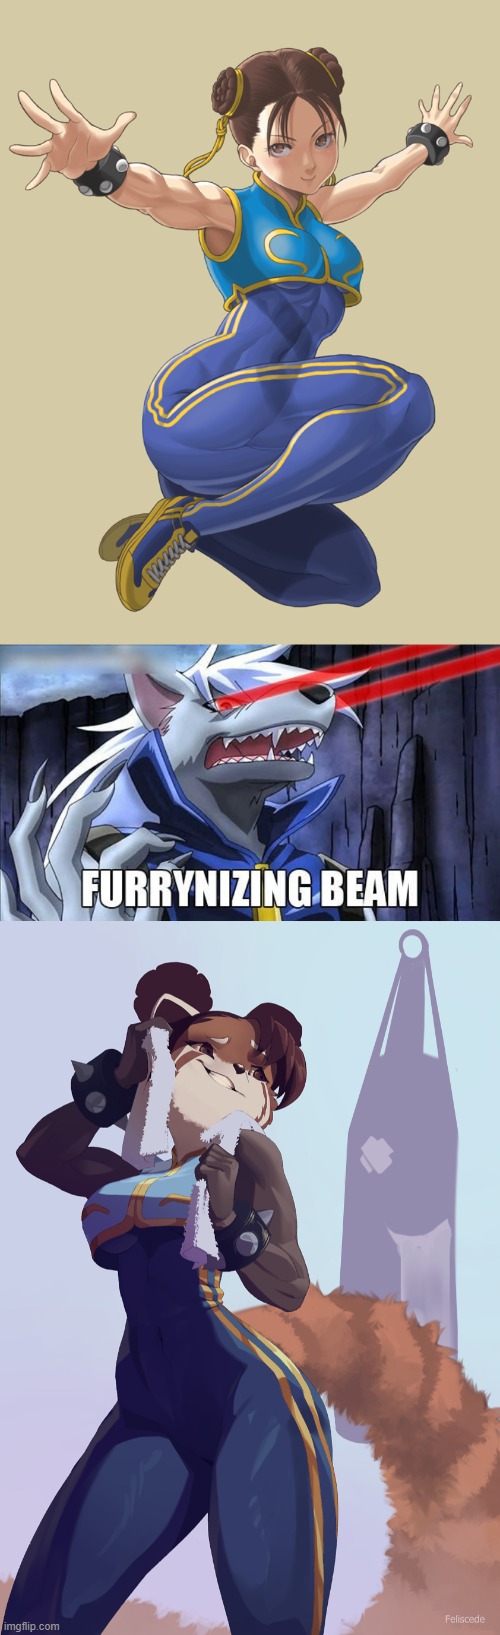 By feliscede (mode note:the furrynizing beam is getting annoying) | image tagged in furrynizing beam,chun li,street fighter,memes,furry,thighs | made w/ Imgflip meme maker